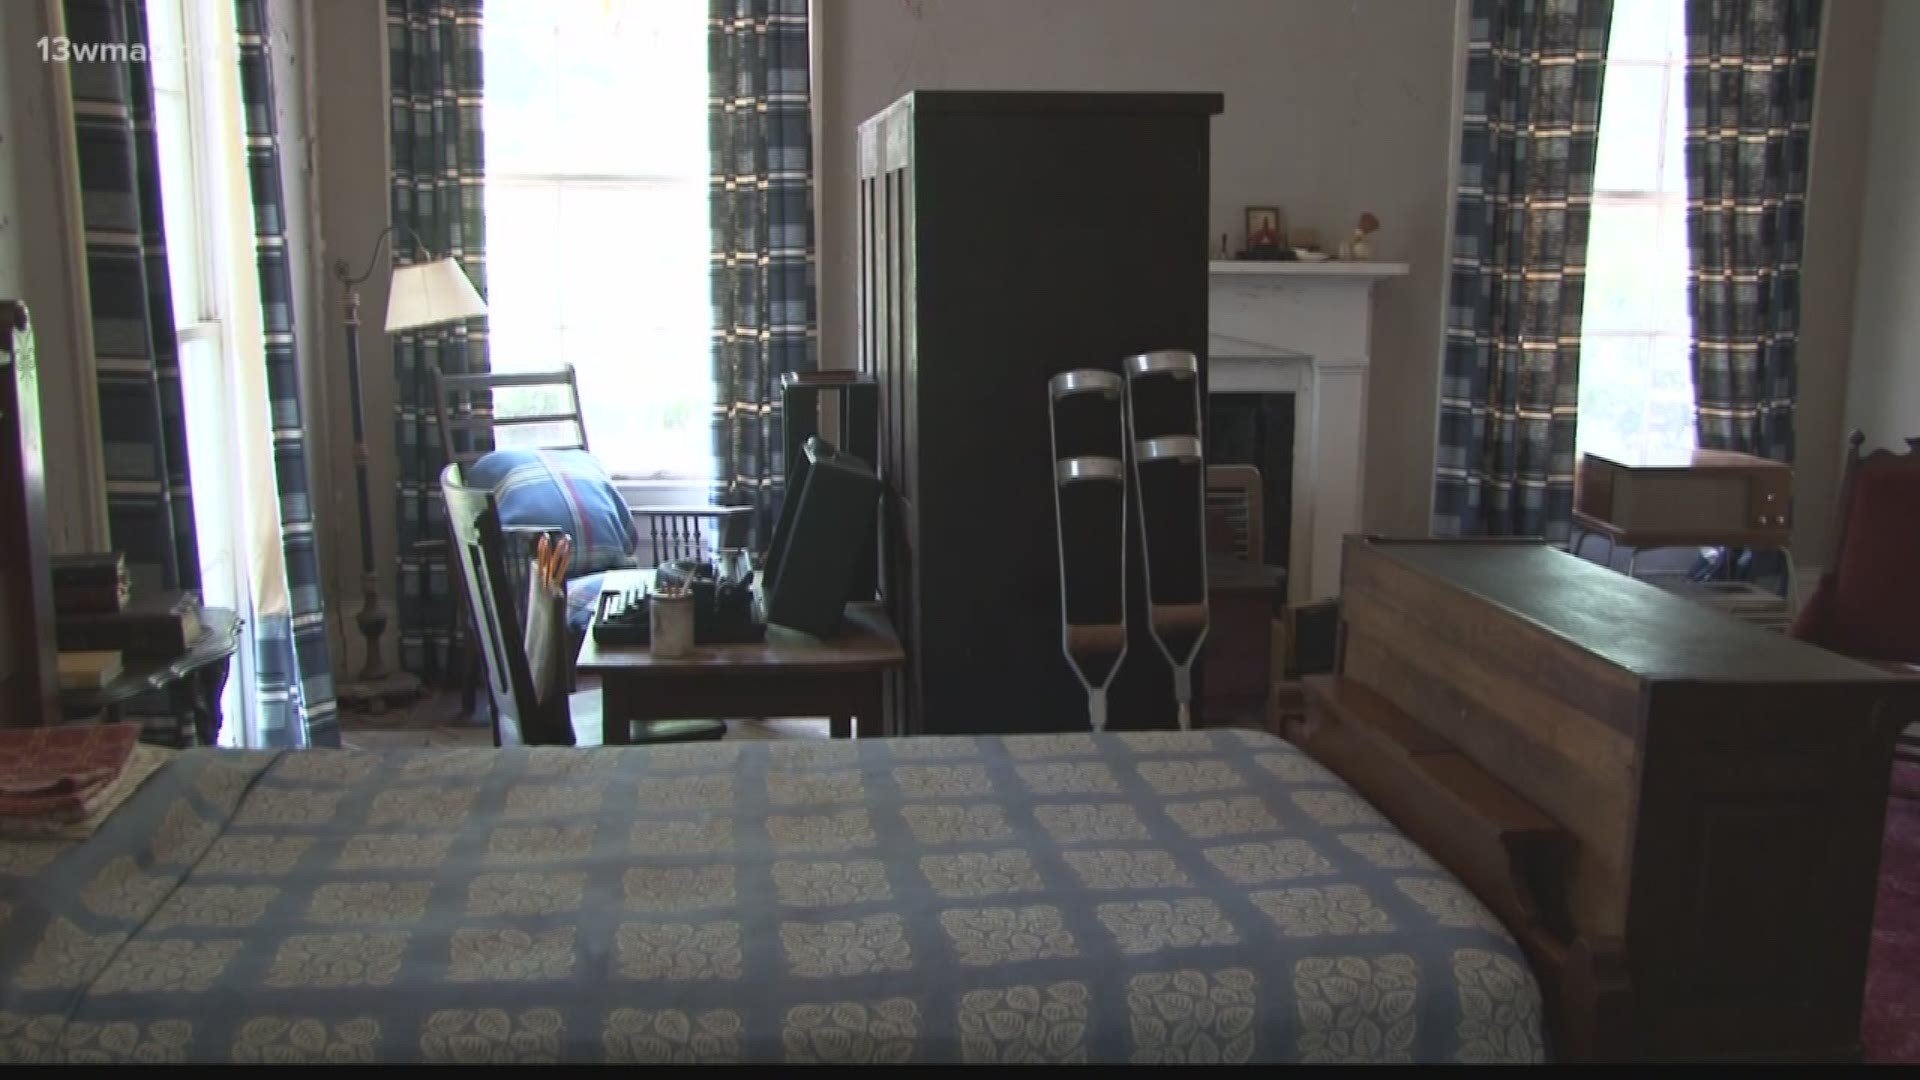 Flannery O'Connor's home to reopen